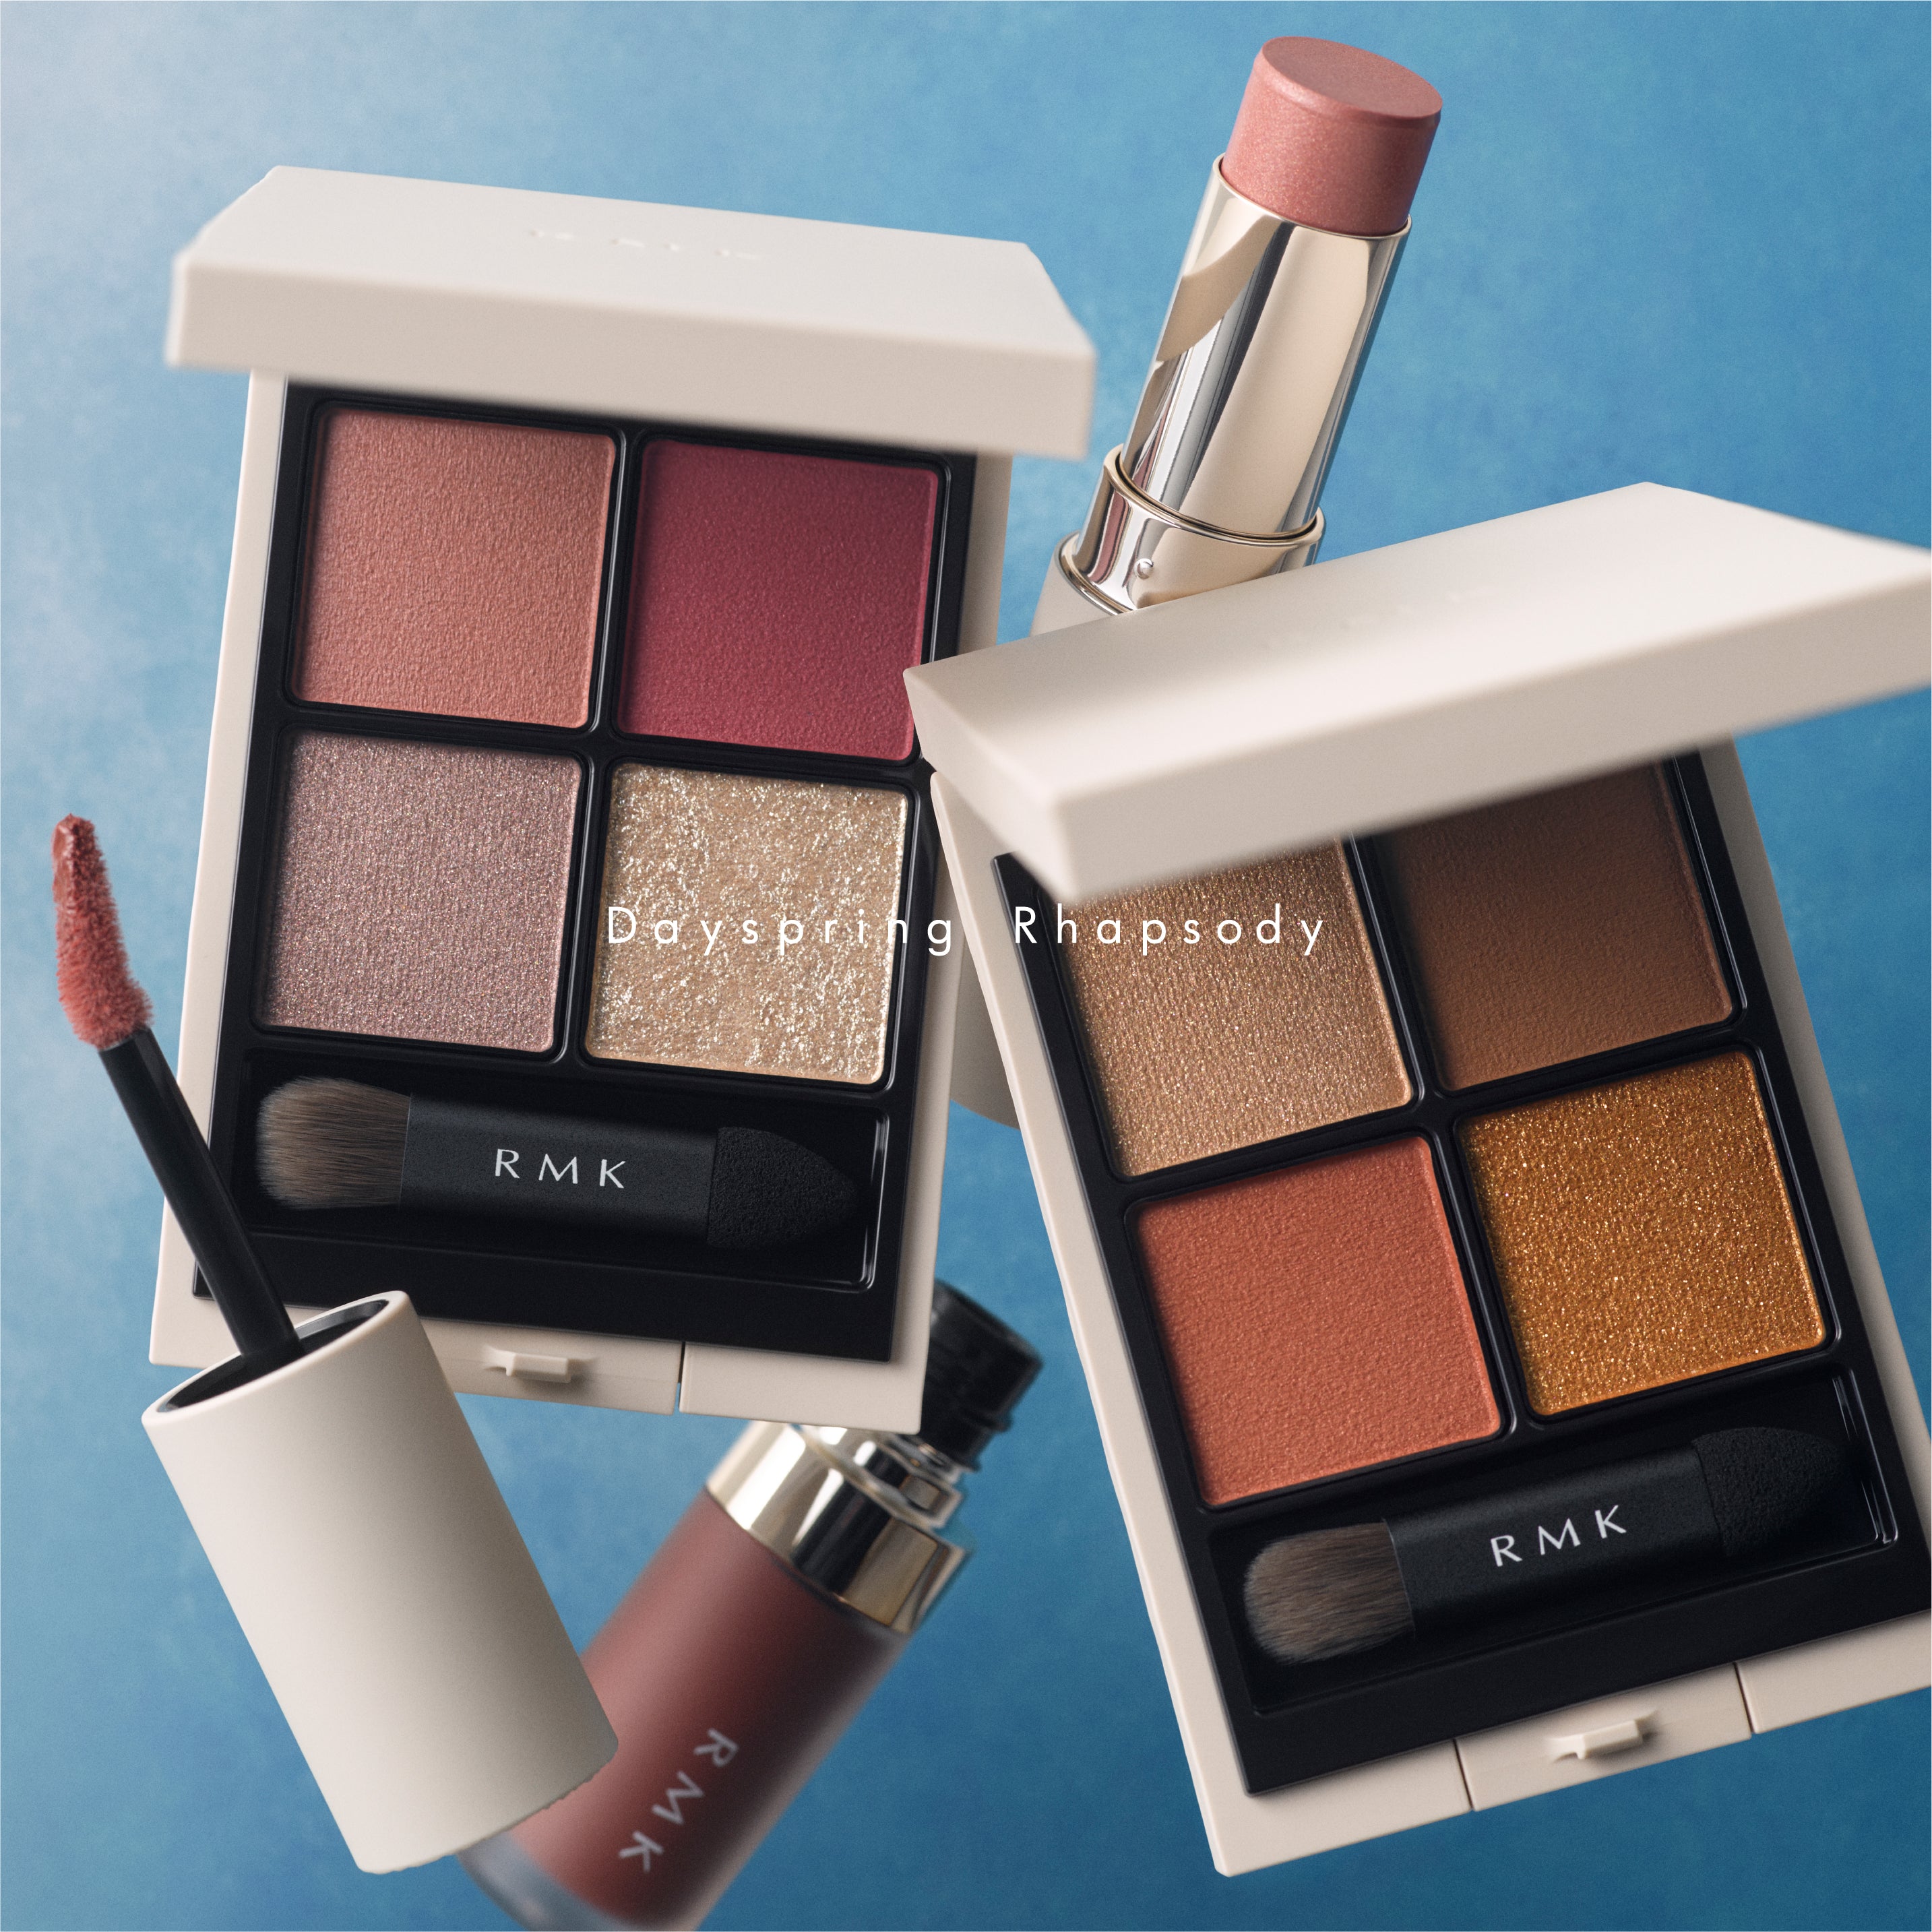 RMK Synchromatic Eyeshadow Palette (Limited Colors)